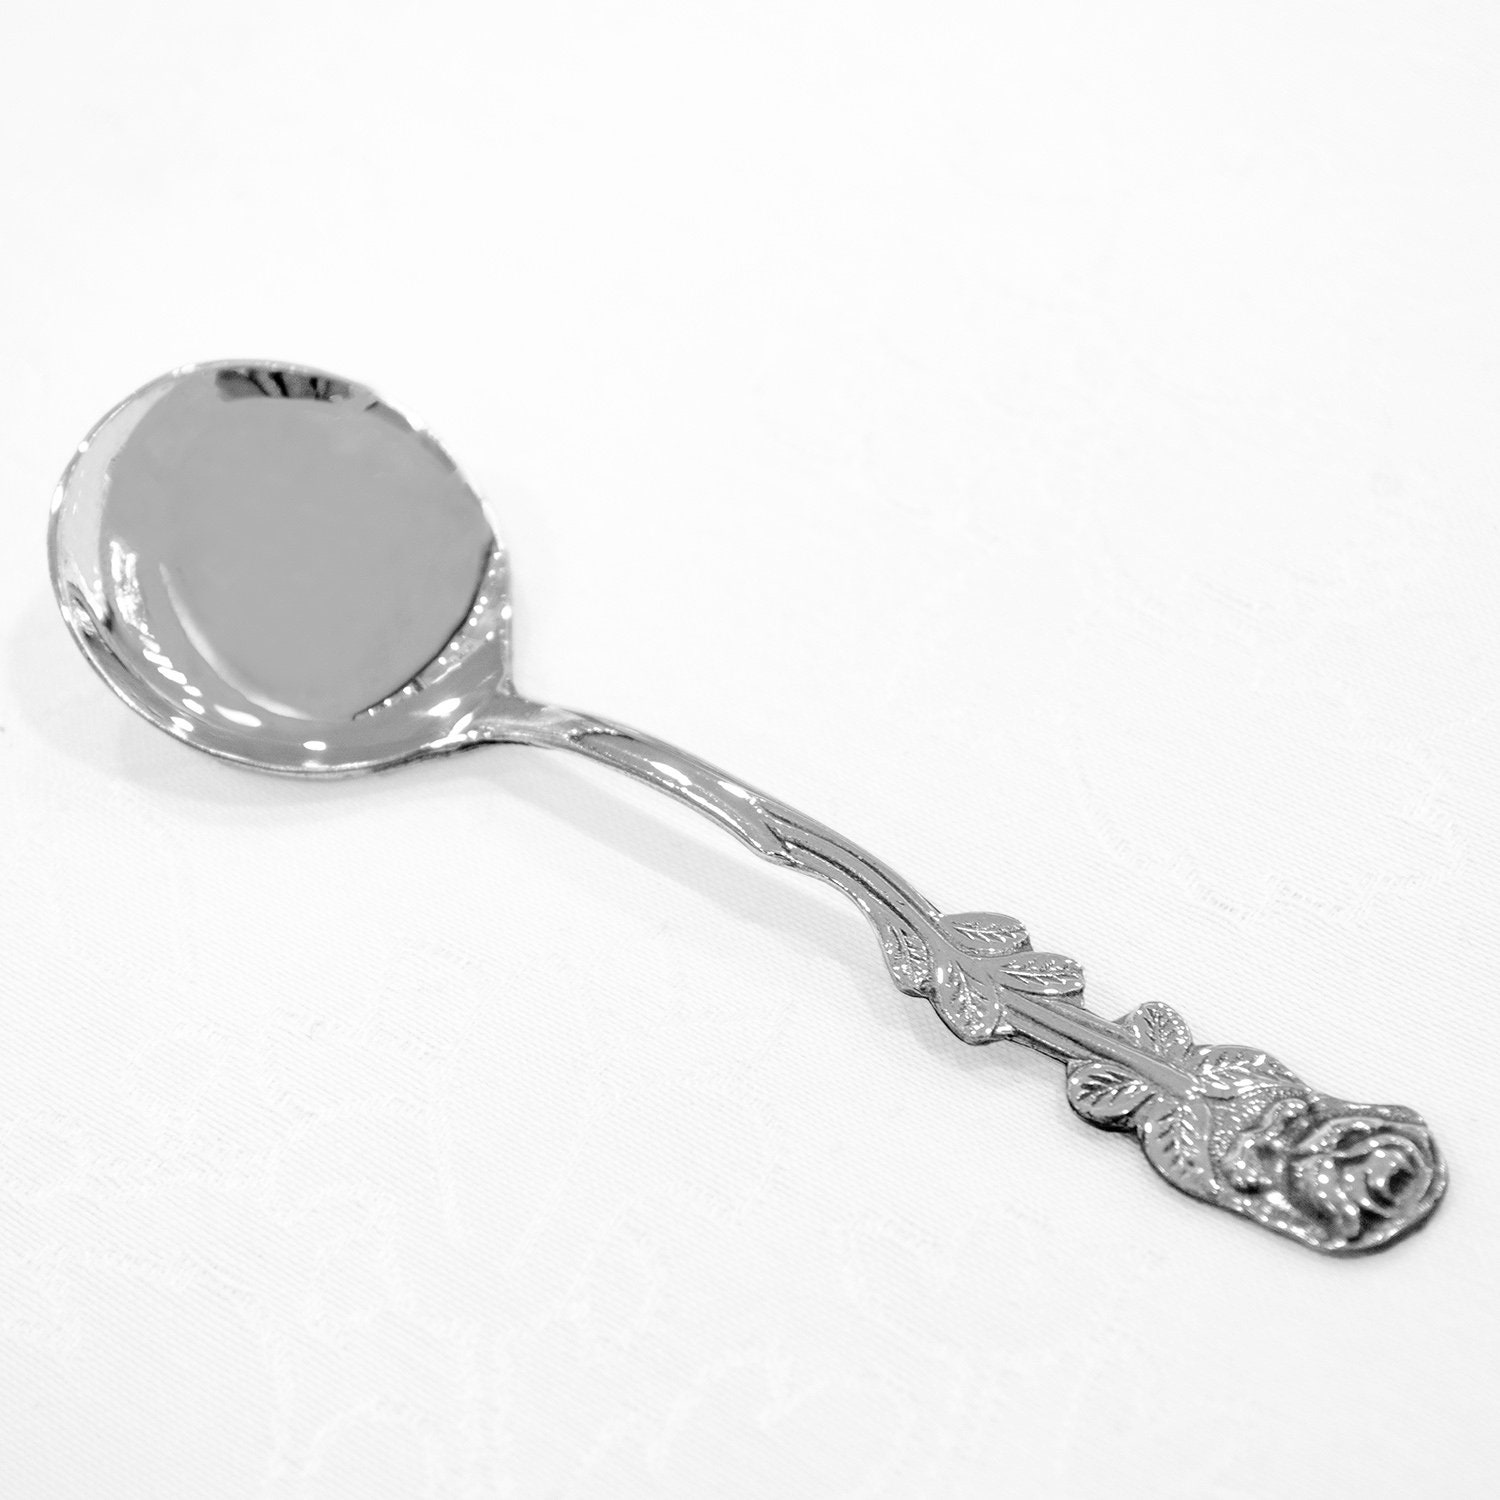 Antique Replica Flower NEW 925 Sterling Silver Salt Spoon with Rose Handle 